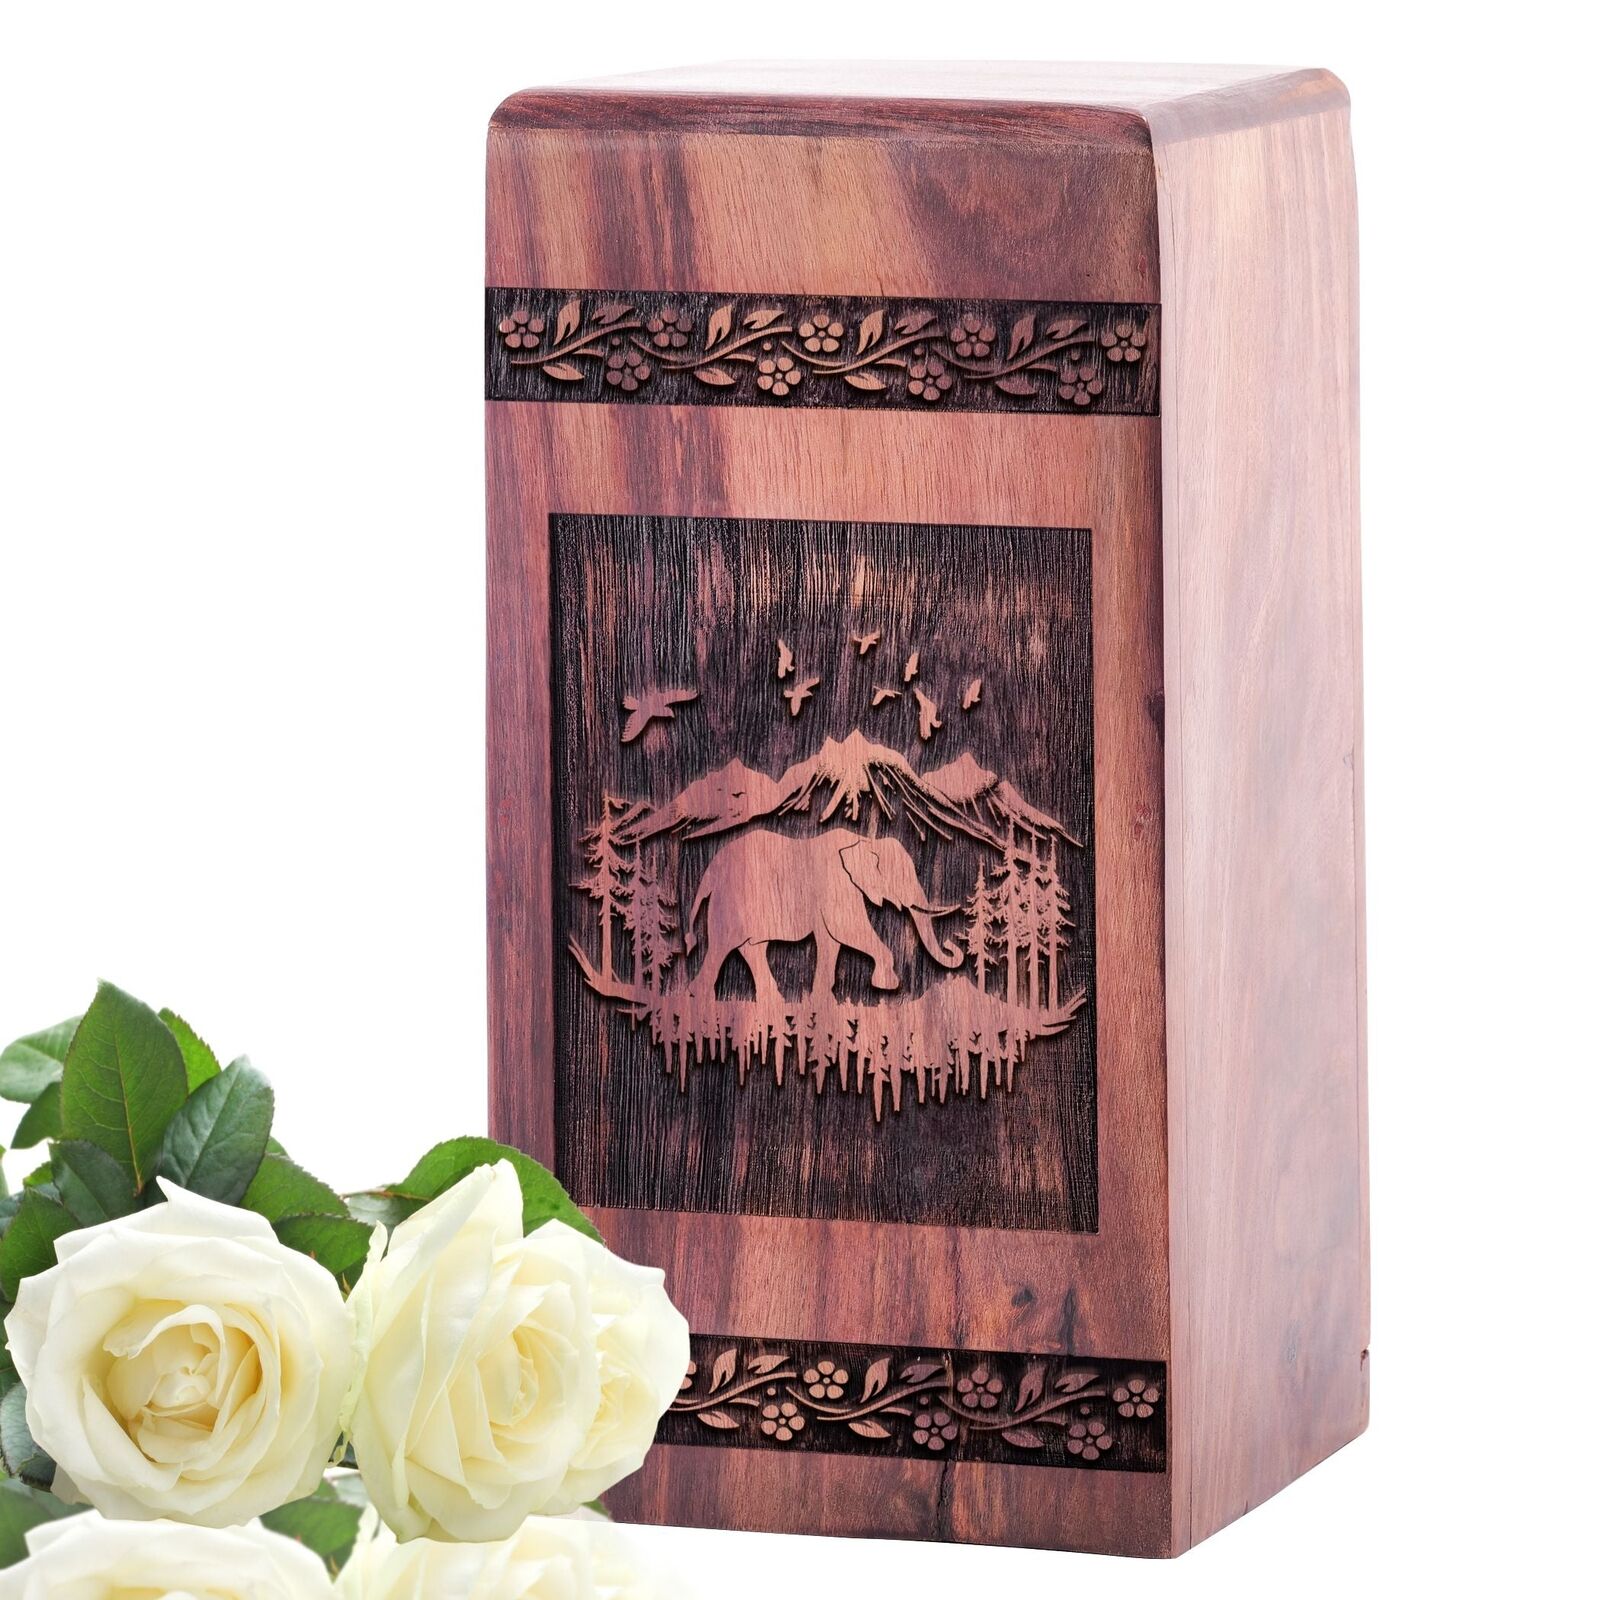 Elephant Design Wood Funeral Burial Urns for Adult Human Ashes